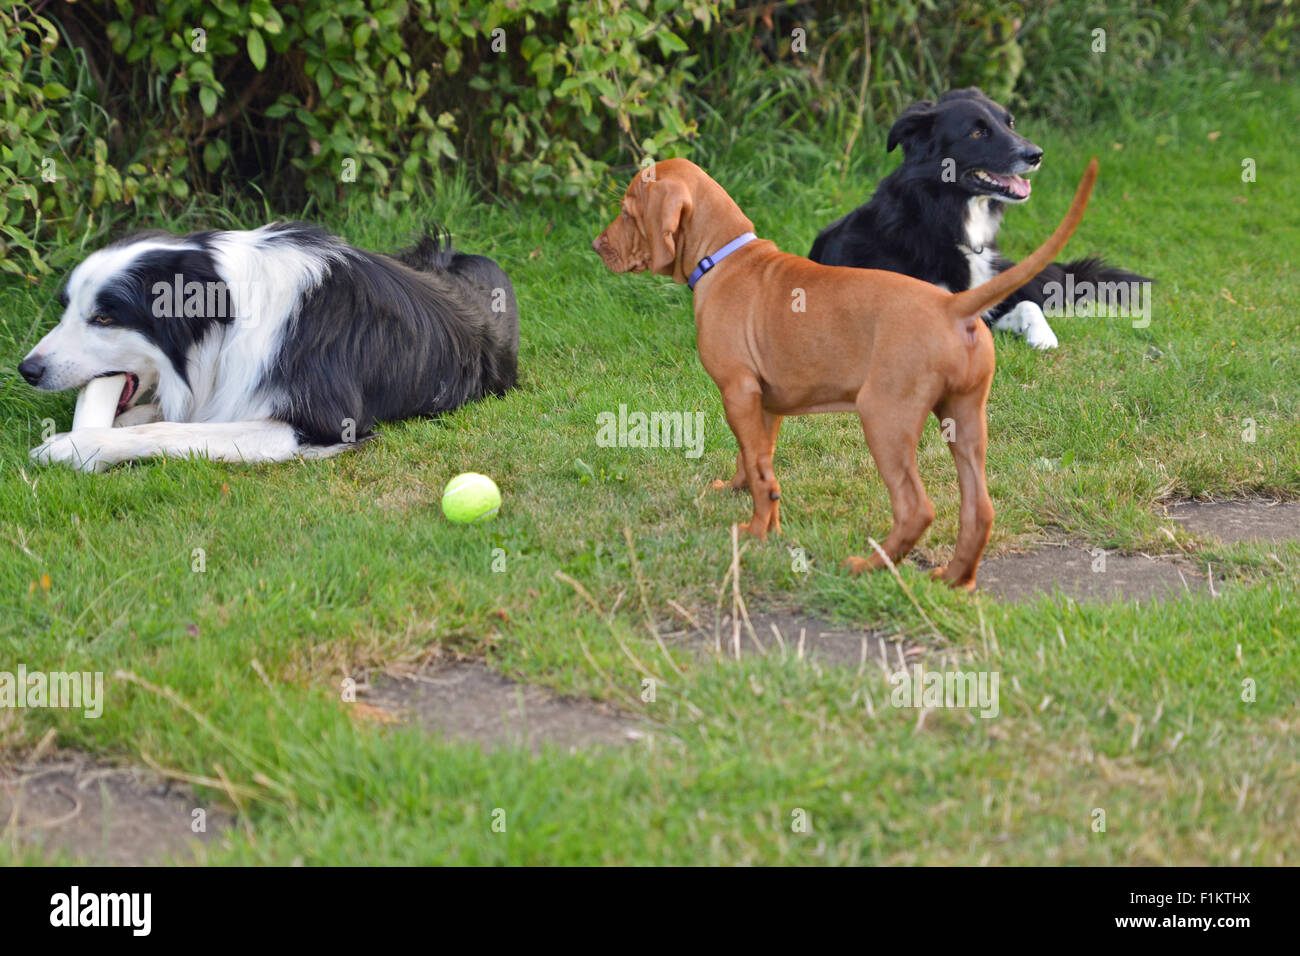 Eight week old Vizsla puppy seeking attention from adult border collies Stock Photo